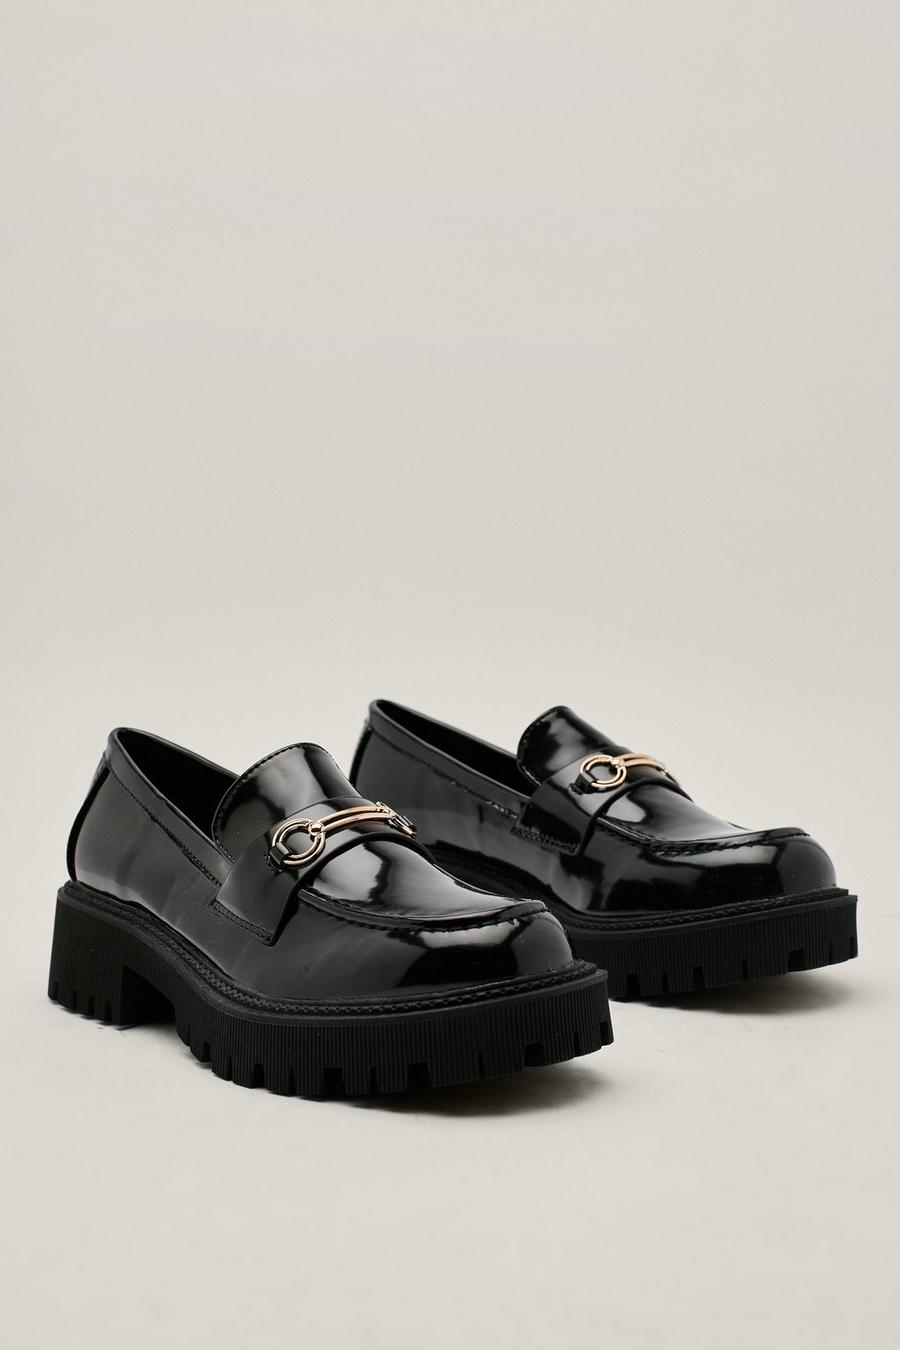 Buckle Detail Chunky Patent Faux Leather Loafers